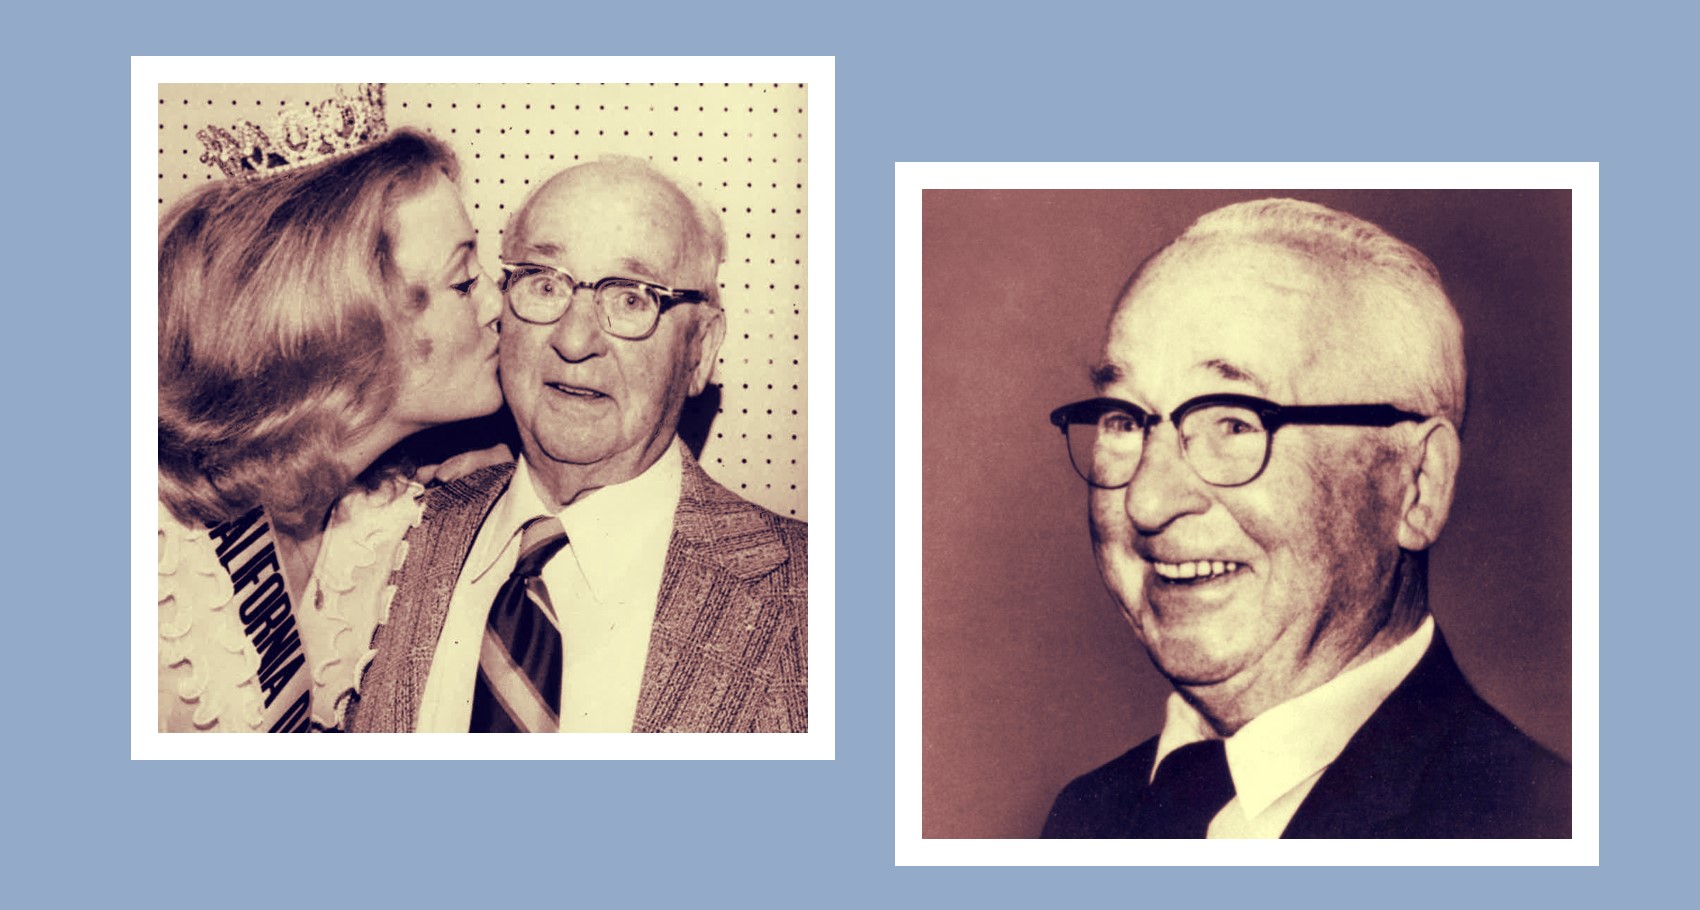 Black and white photos of William Dreyer and photo of woman kissing him on the cheek.